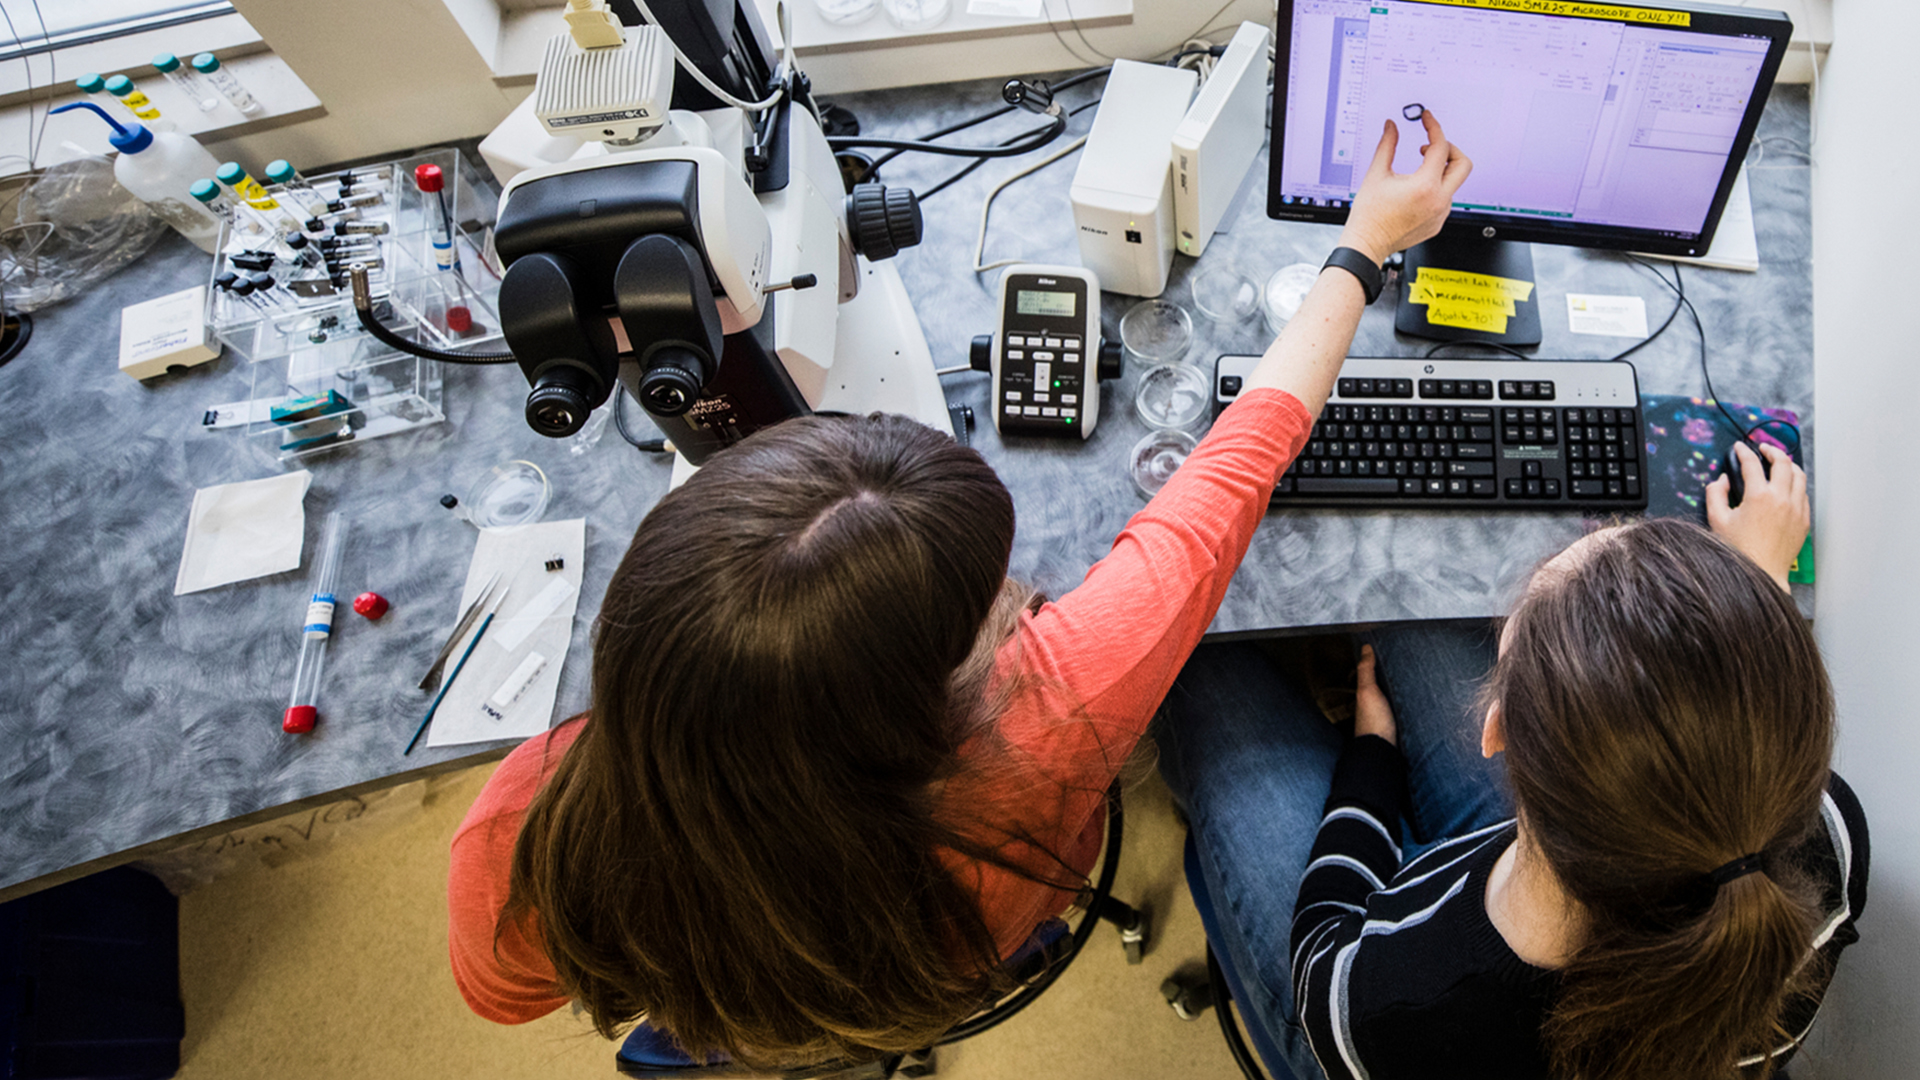   Geology student Sarah Howe, right, and Geology Professor Jeni McDermott, left, work together at a computer in a Geology Lab room in Owens Science Hall on December 11, 2017 in St. Paul. 